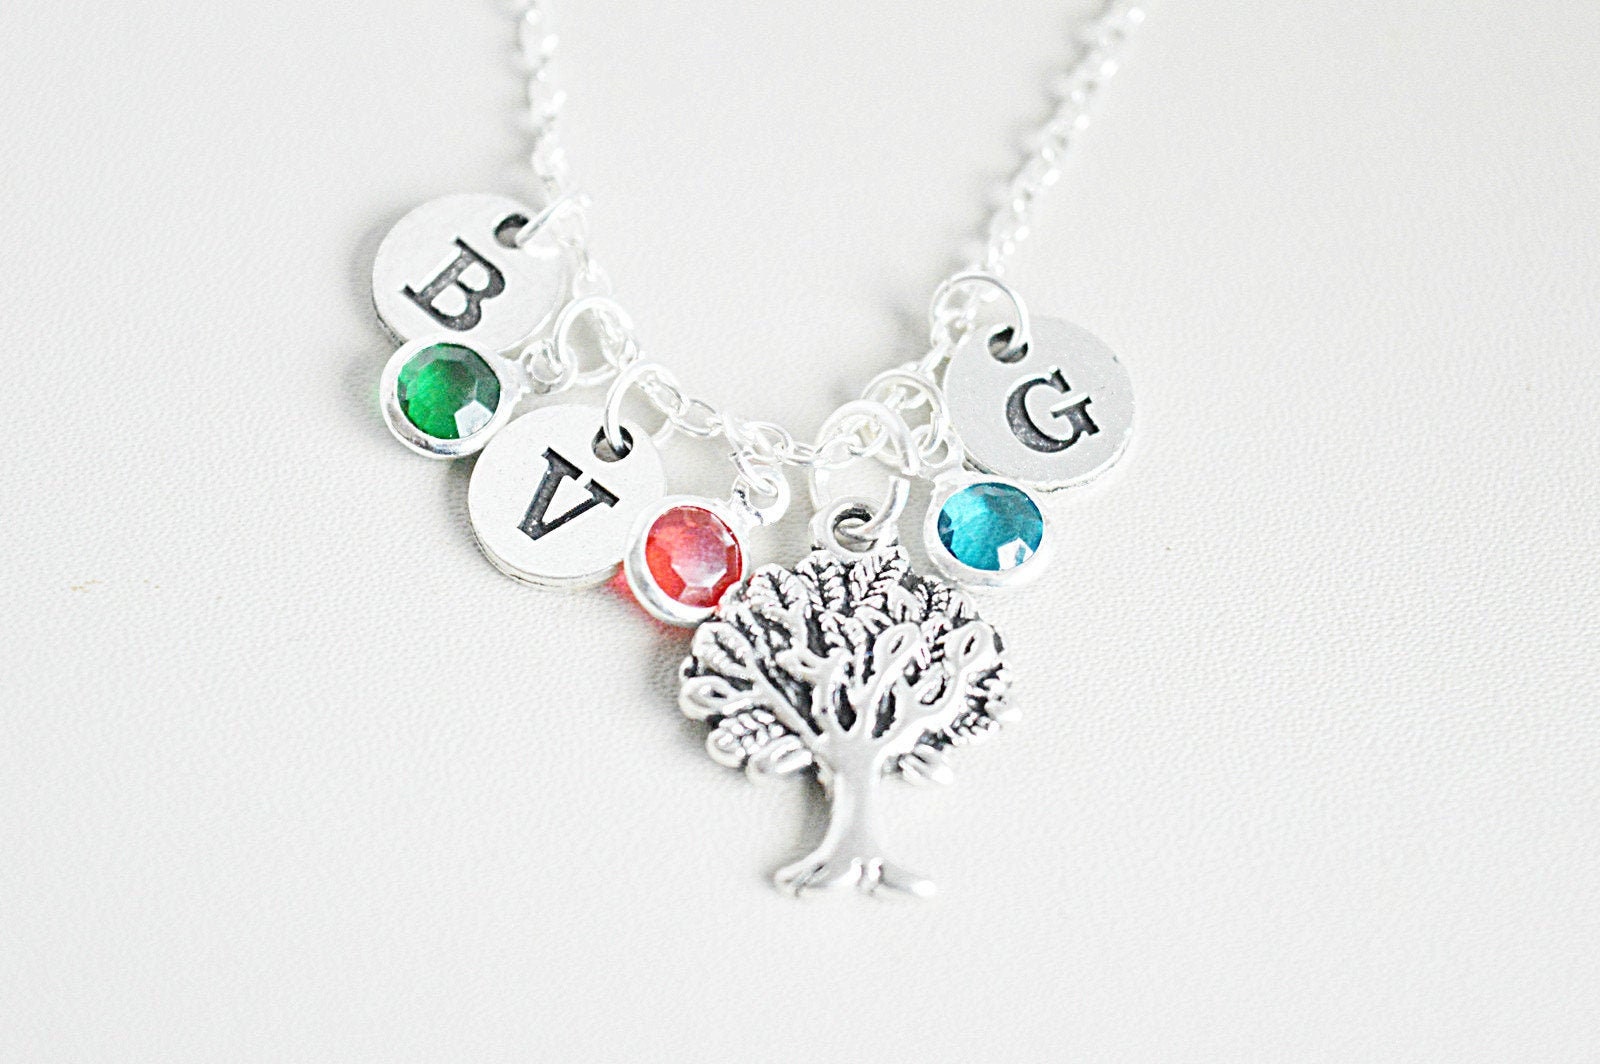 Mother Necklace, Sisters Necklace, Family Necklace, Grandmother Gift, Family Jewelry, Gift for Wife, Gift for Her, Family Tree, Grandma